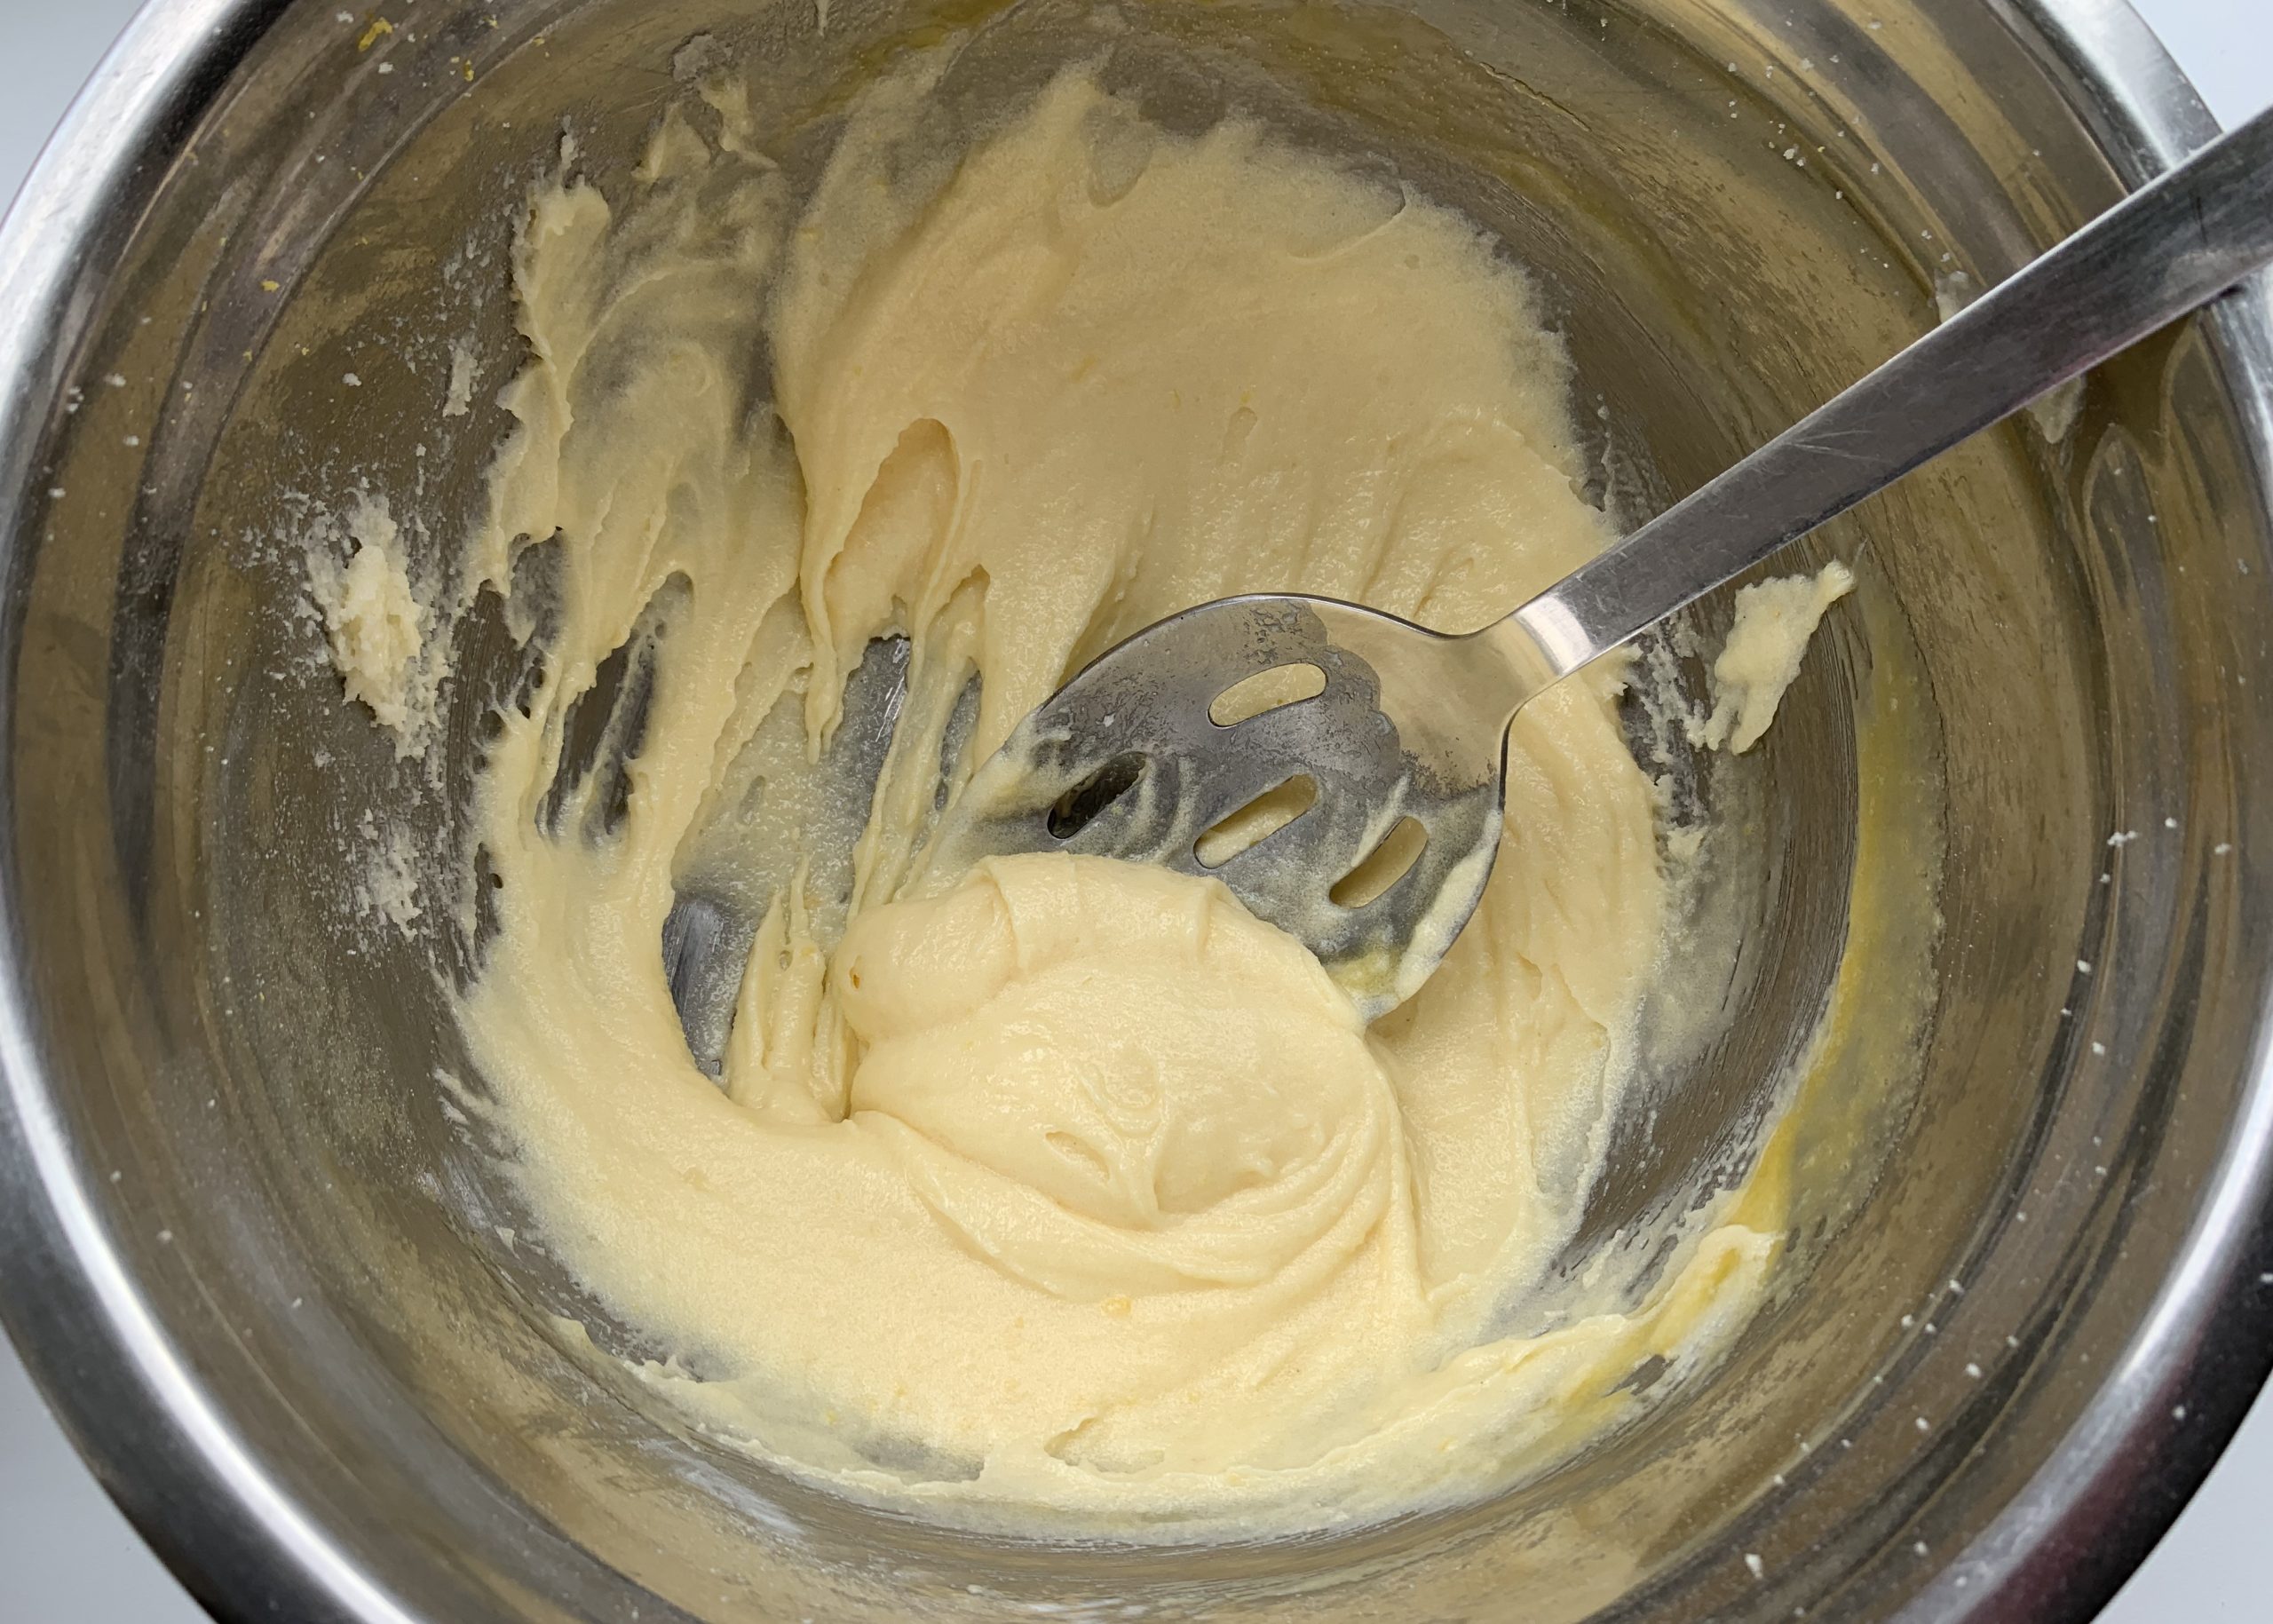 Mixture in a stainless steel bowl for gluten free lemon surprise pudding